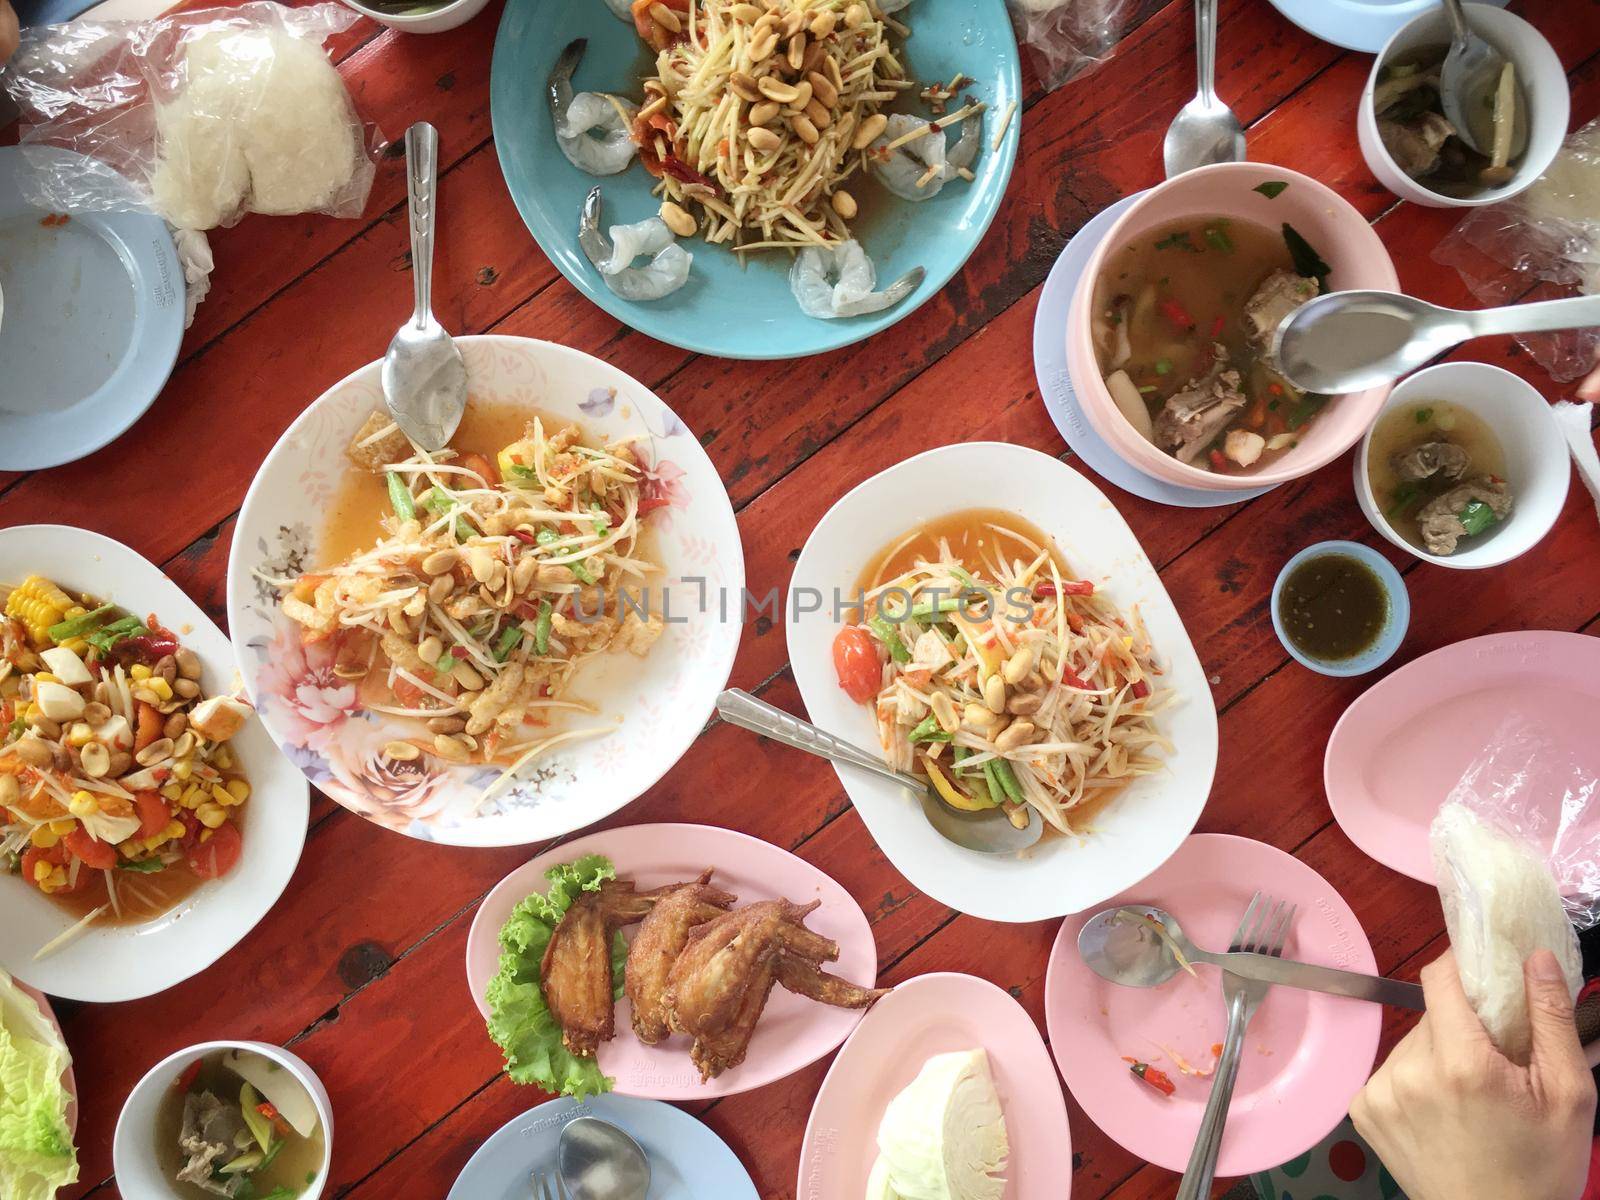 Top view Thai food on table: Eating north eastern foods (SOM TUM - Spicy Papaya Salad, Sticky rice, NUM TOK - Spicy Soup). Local and traditional way. Thai Food Background. enjoy eating concept